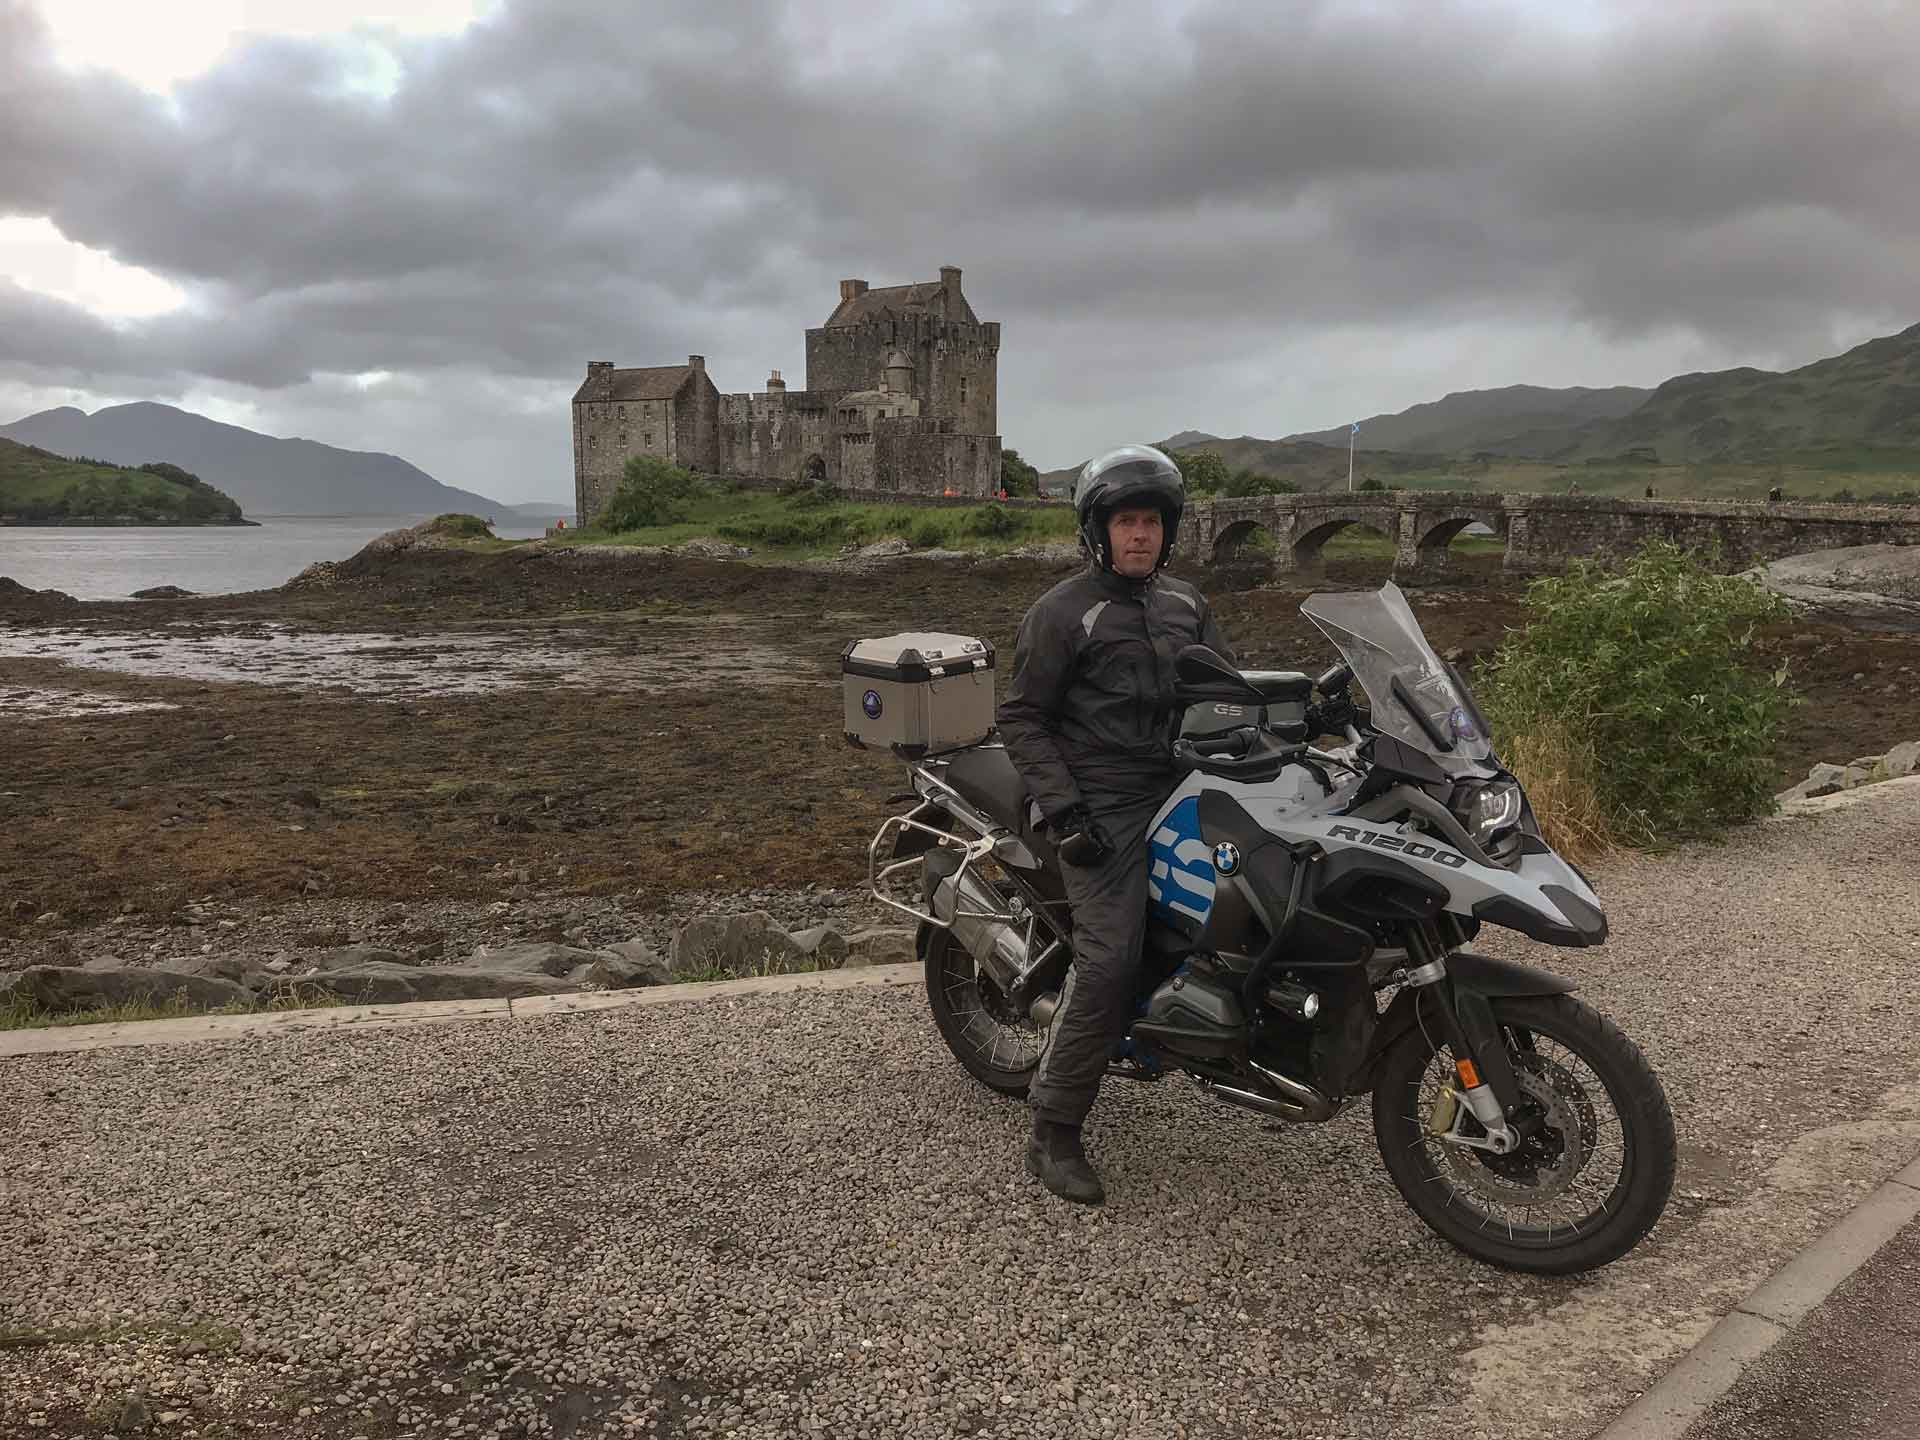 Scotland Motorcycle Tour, Days 5 & 6 - Free day in Oban and then on to Ullapool 